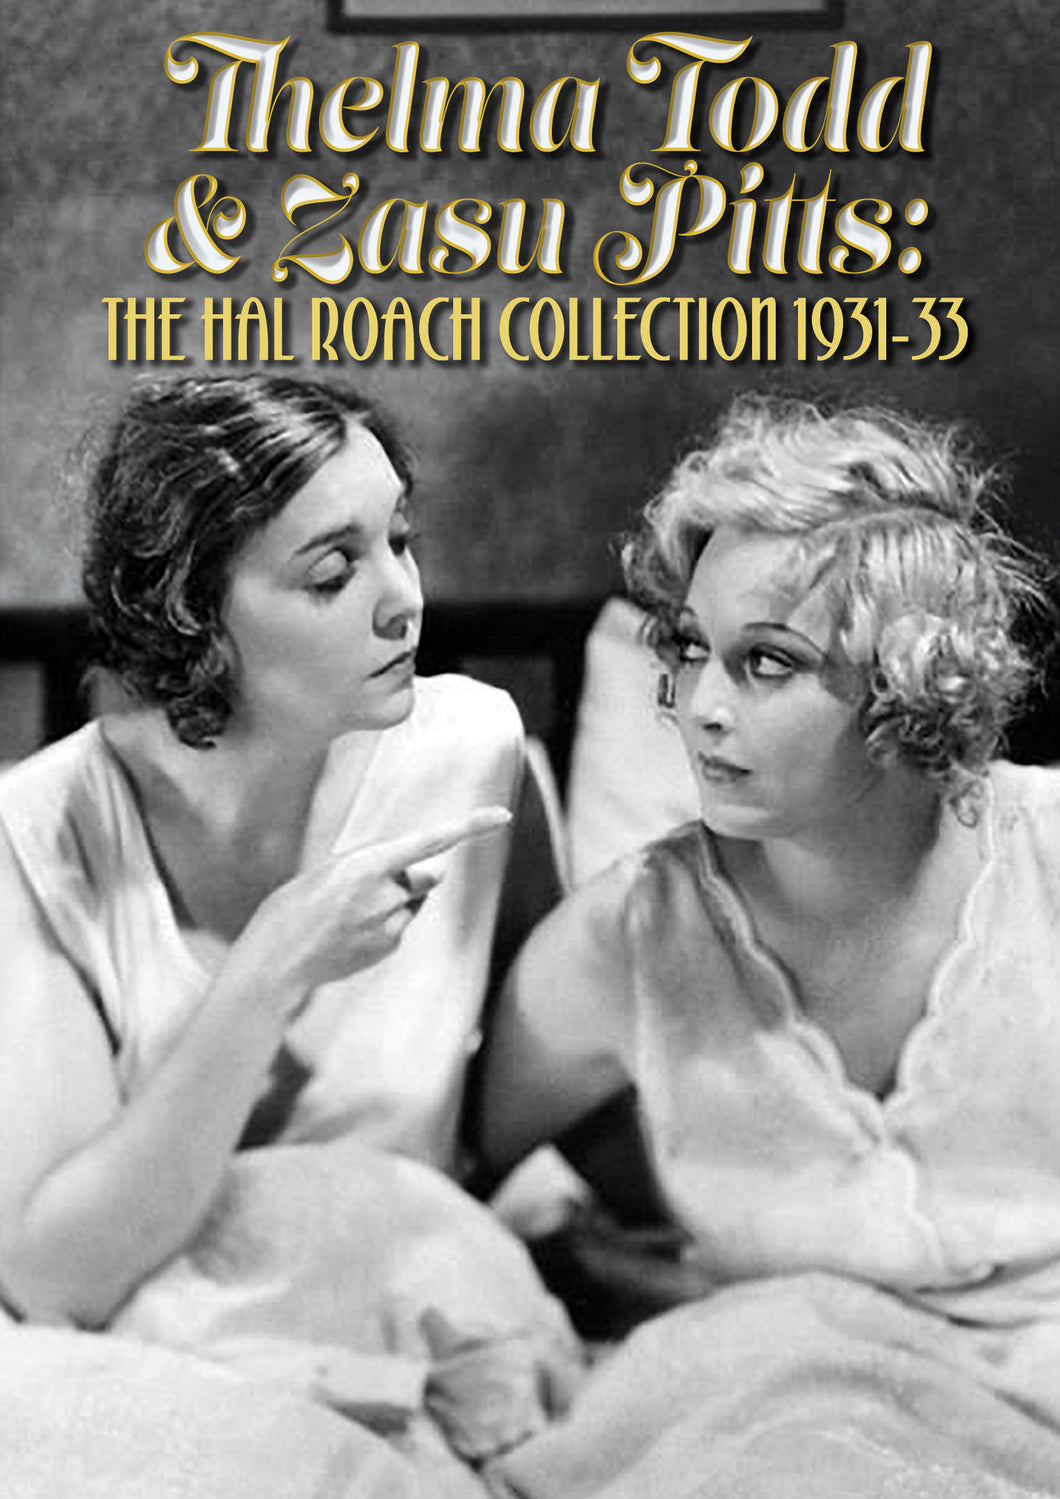 Thelma Todd & Zasu Pitts: The Hal Roach Collection 1931-33 (DVD)